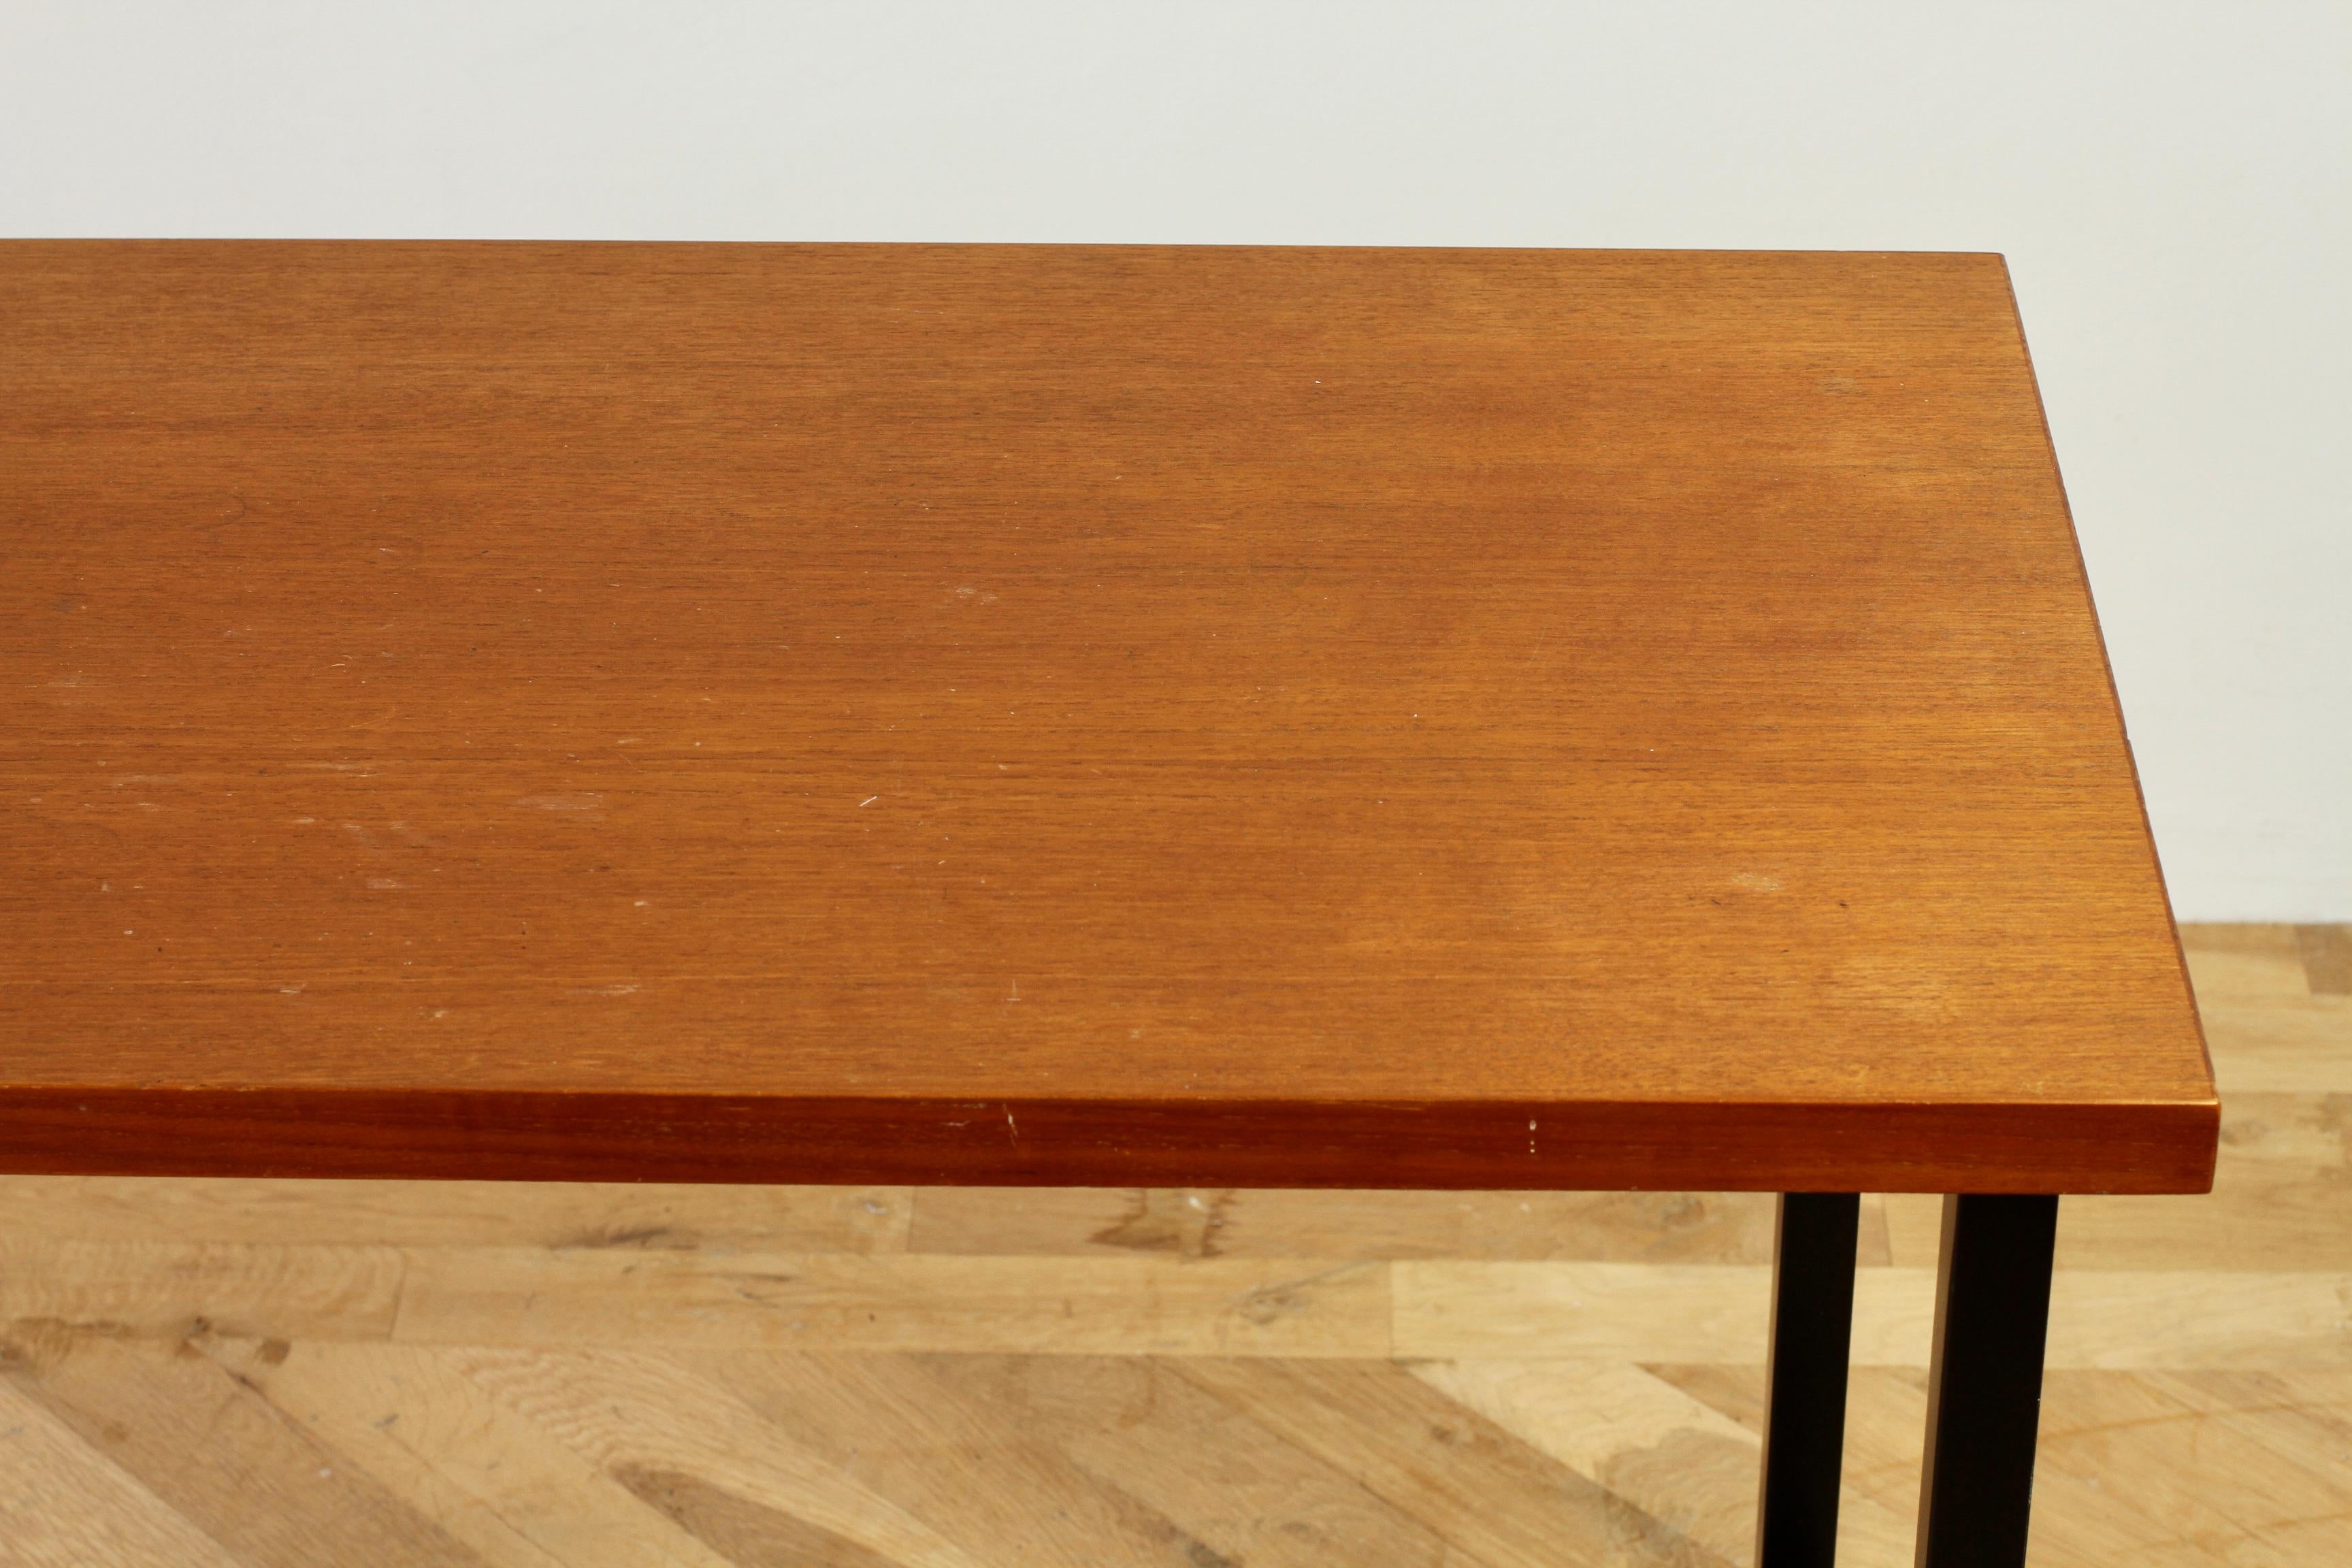 Florence Knoll 1950s Mid-Century Wood Veneer Black Frame Desk or Console Table For Sale 5